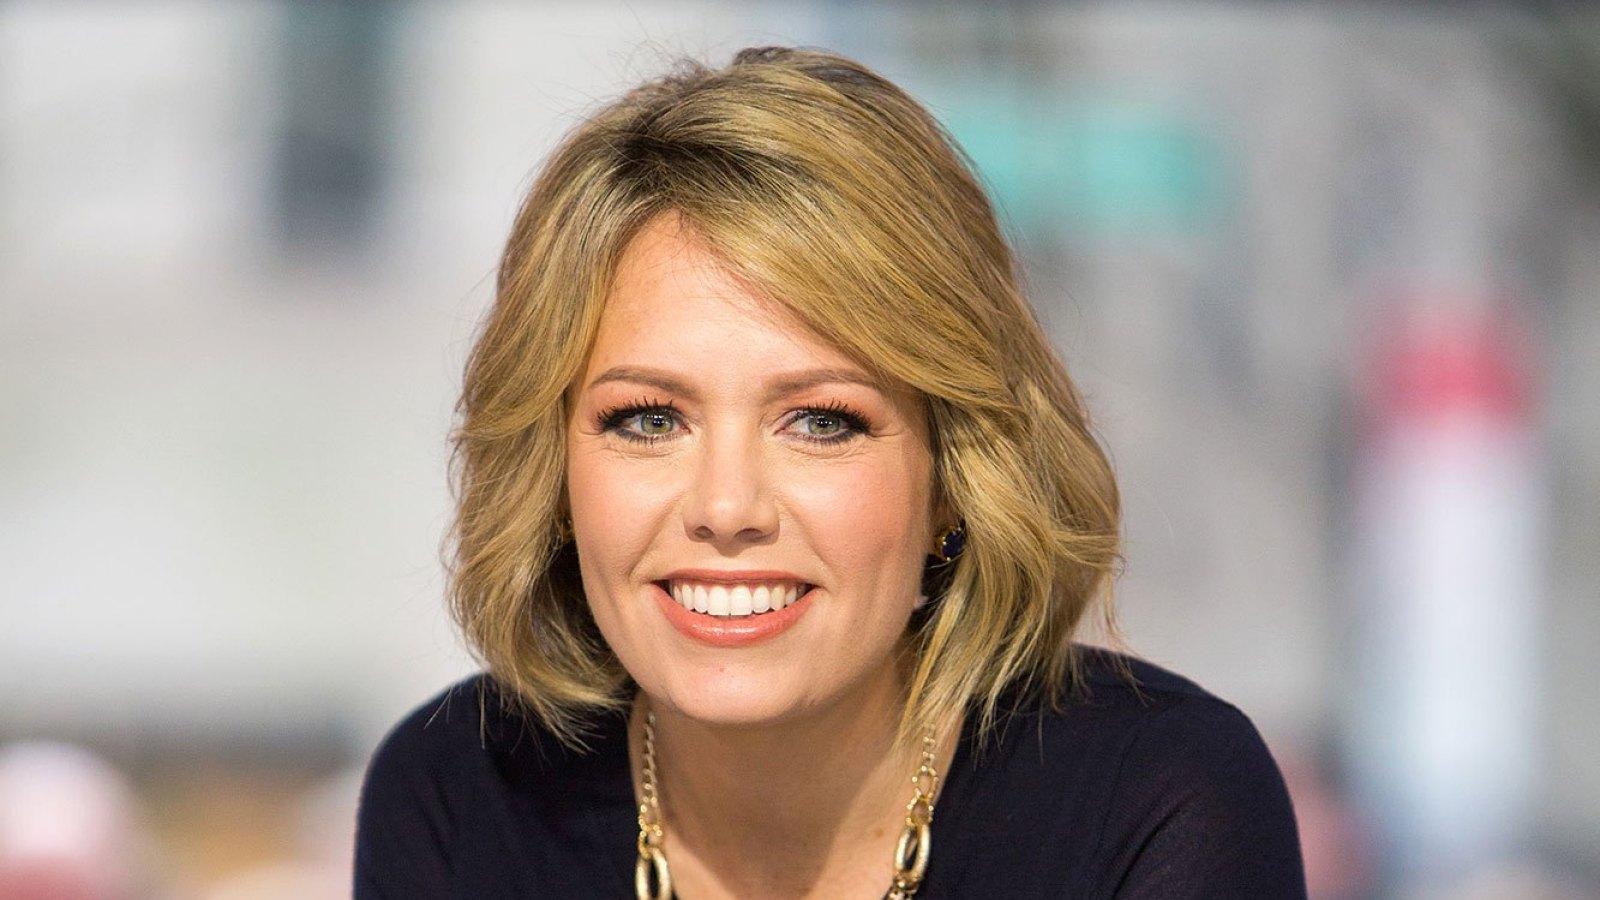 Dylan Dreyer Opens Up About Miscarriage, Secondary Infertility